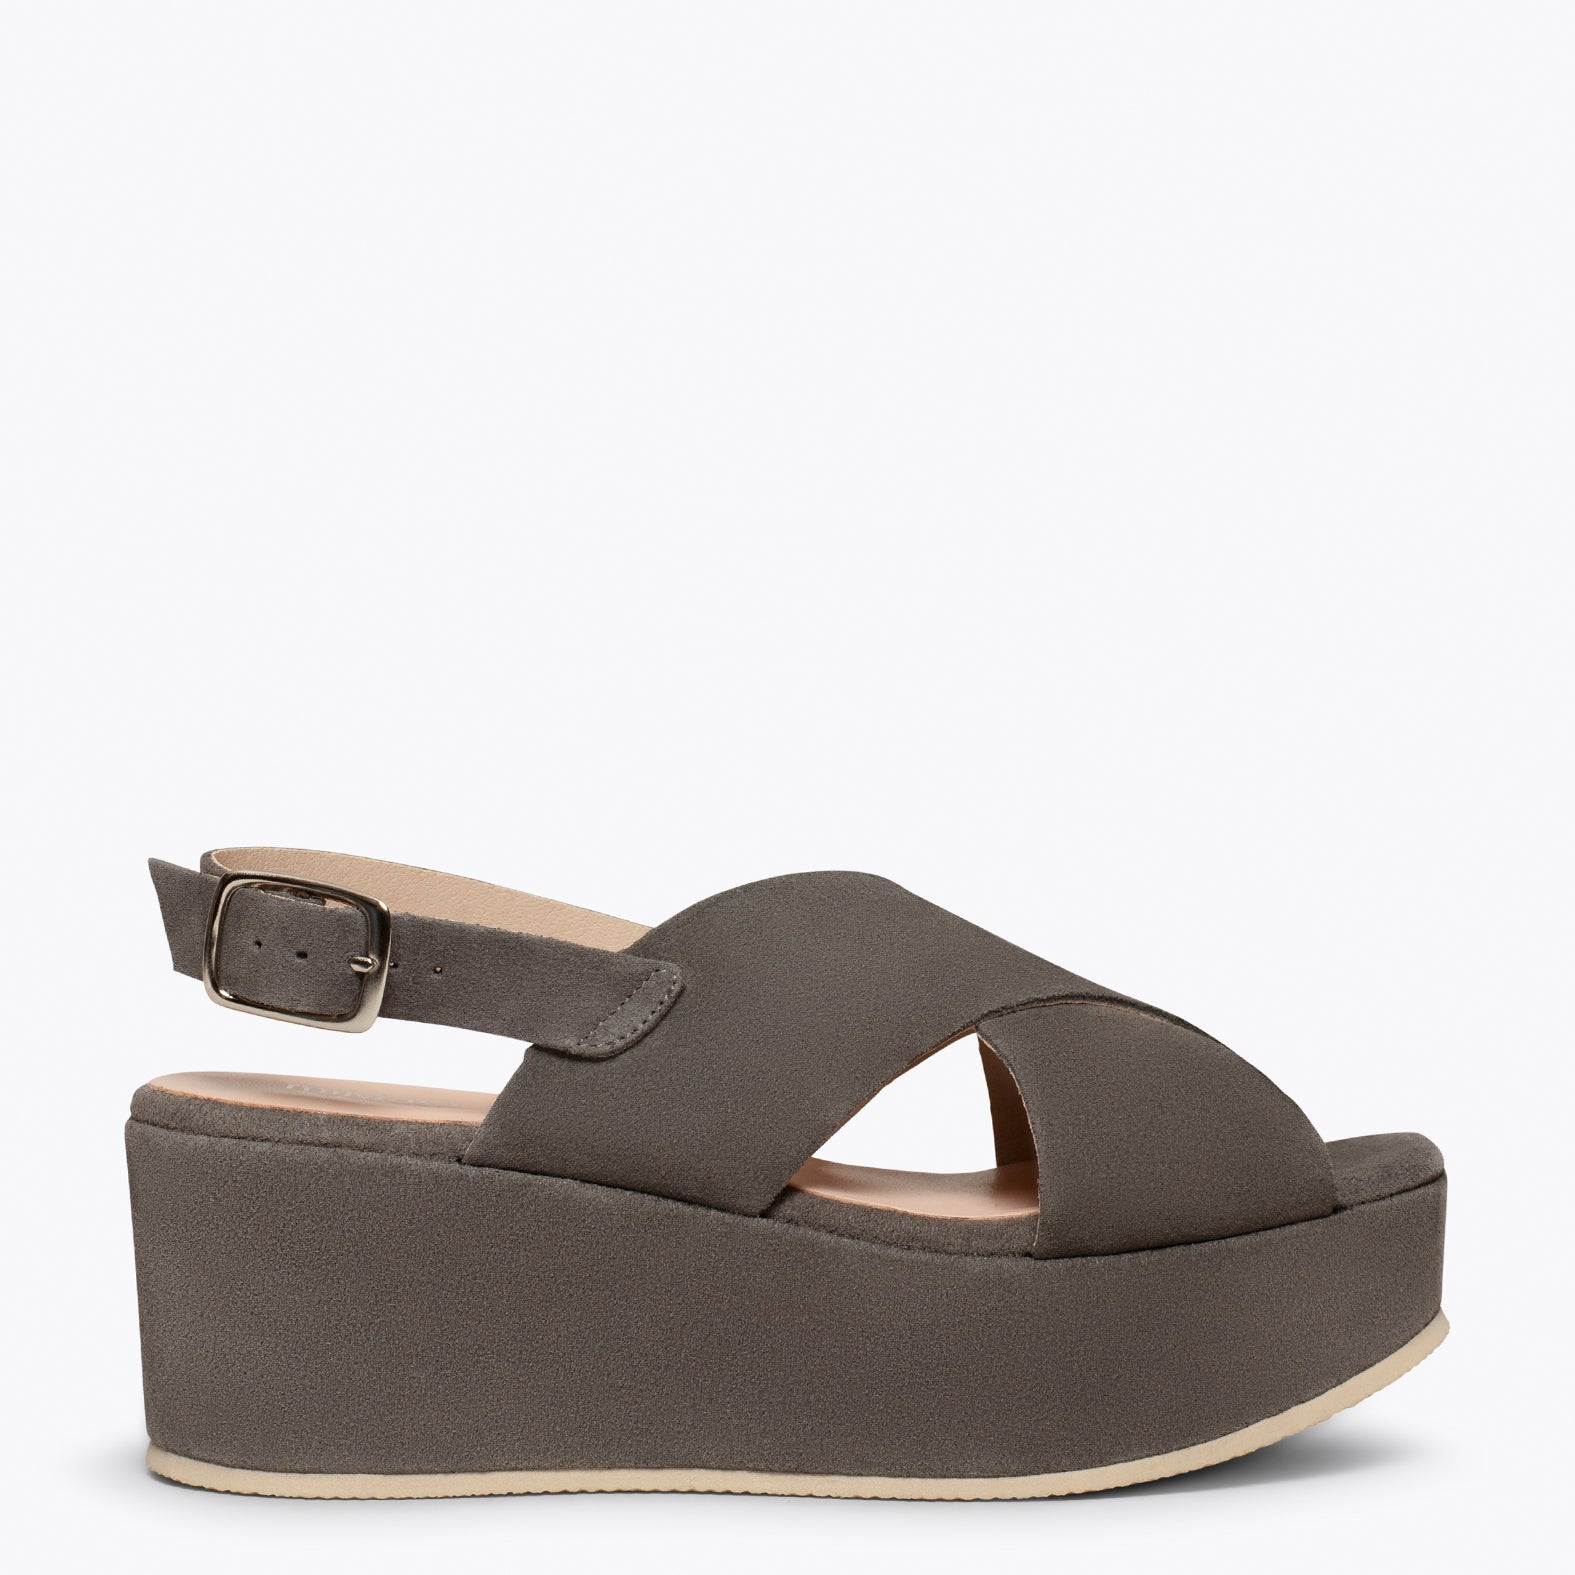 MARA – TAUPE suede platform with front straps